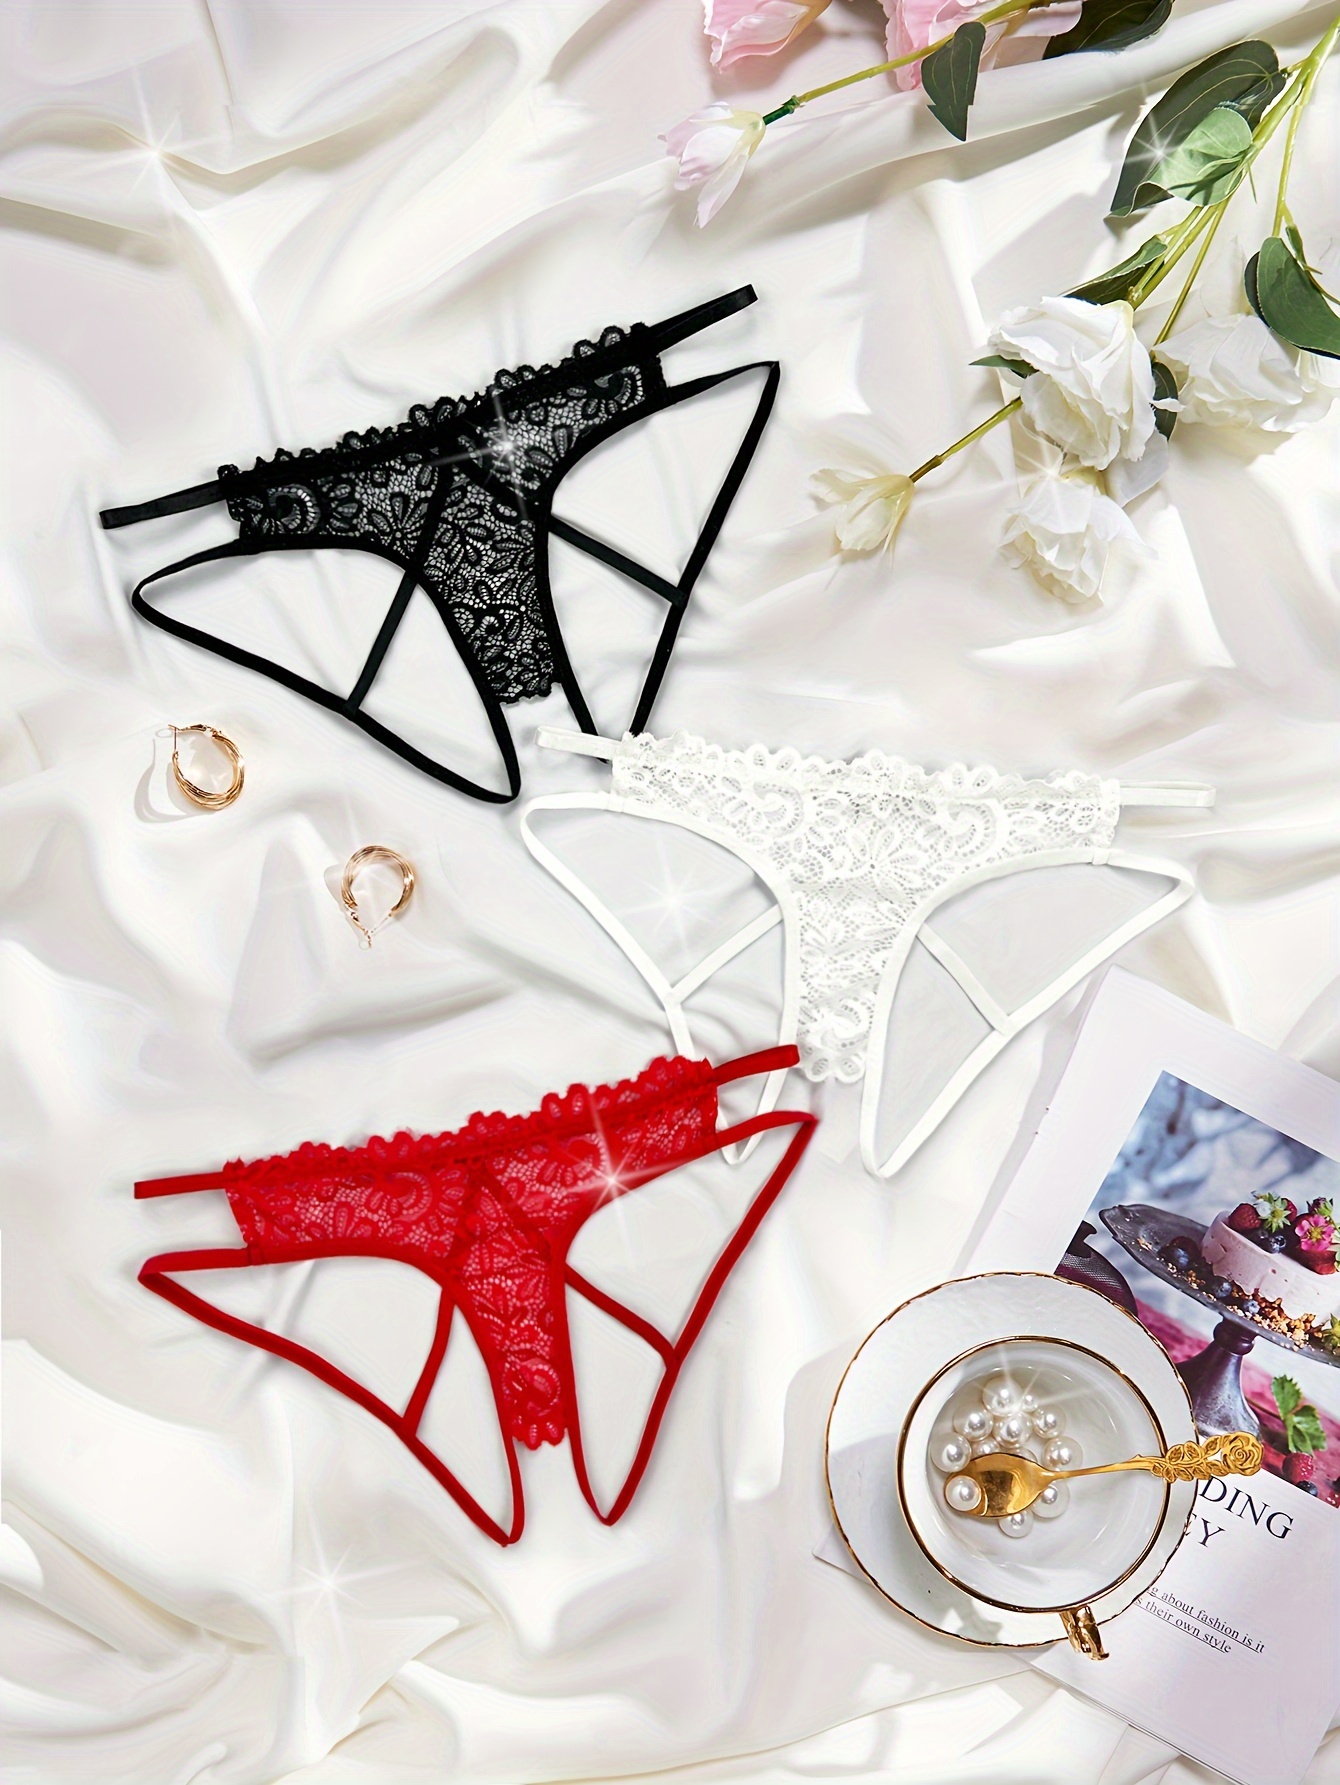 Womens Sexy Panties Open Crotch Knickers Lace Flower Crotchless